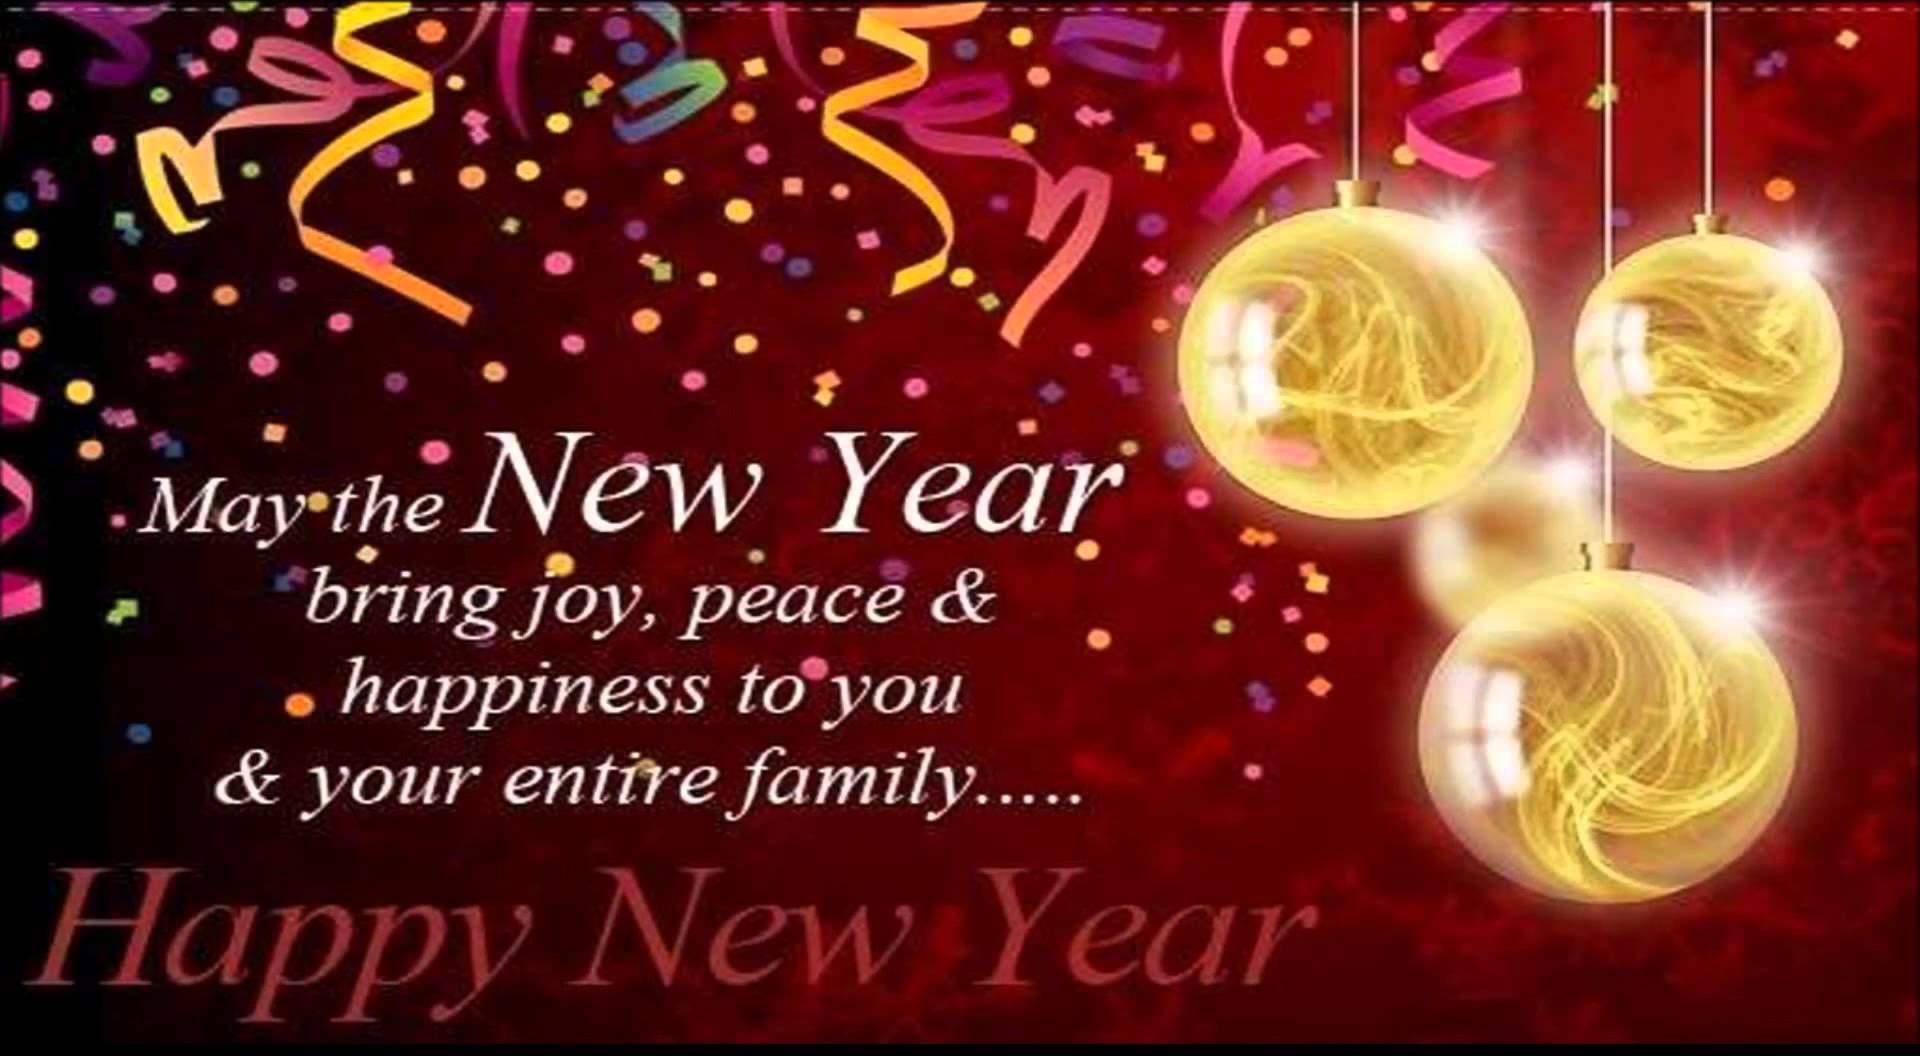 Happy New Year 2019 Image, Quotes, Wishes, Messages, Sayings, Status